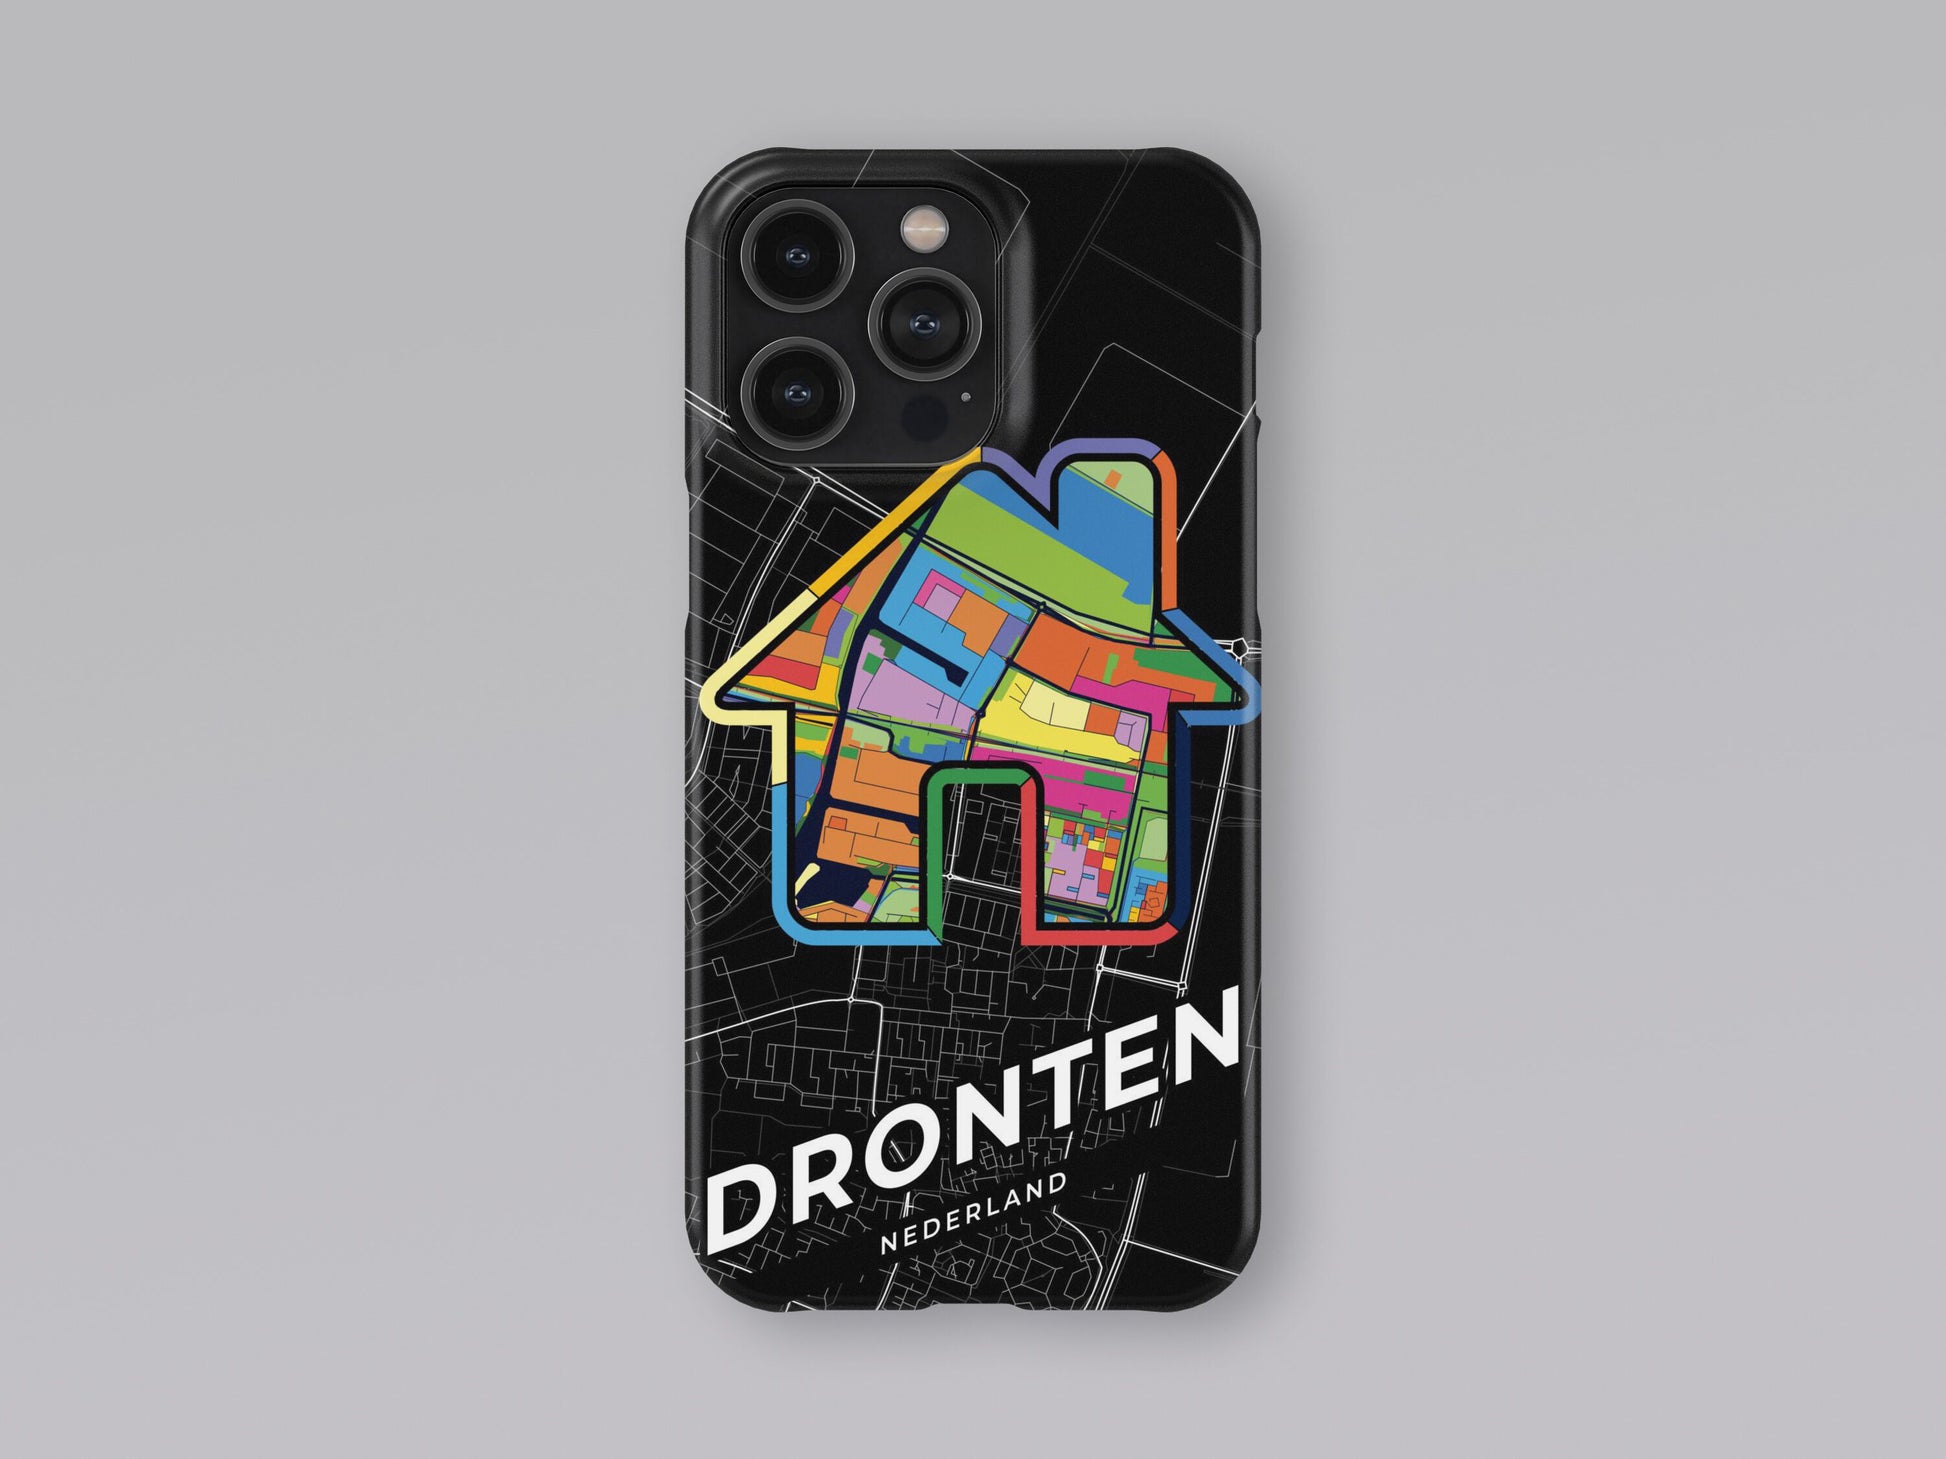 Dronten Netherlands slim phone case with colorful icon. Birthday, wedding or housewarming gift. Couple match cases. 3